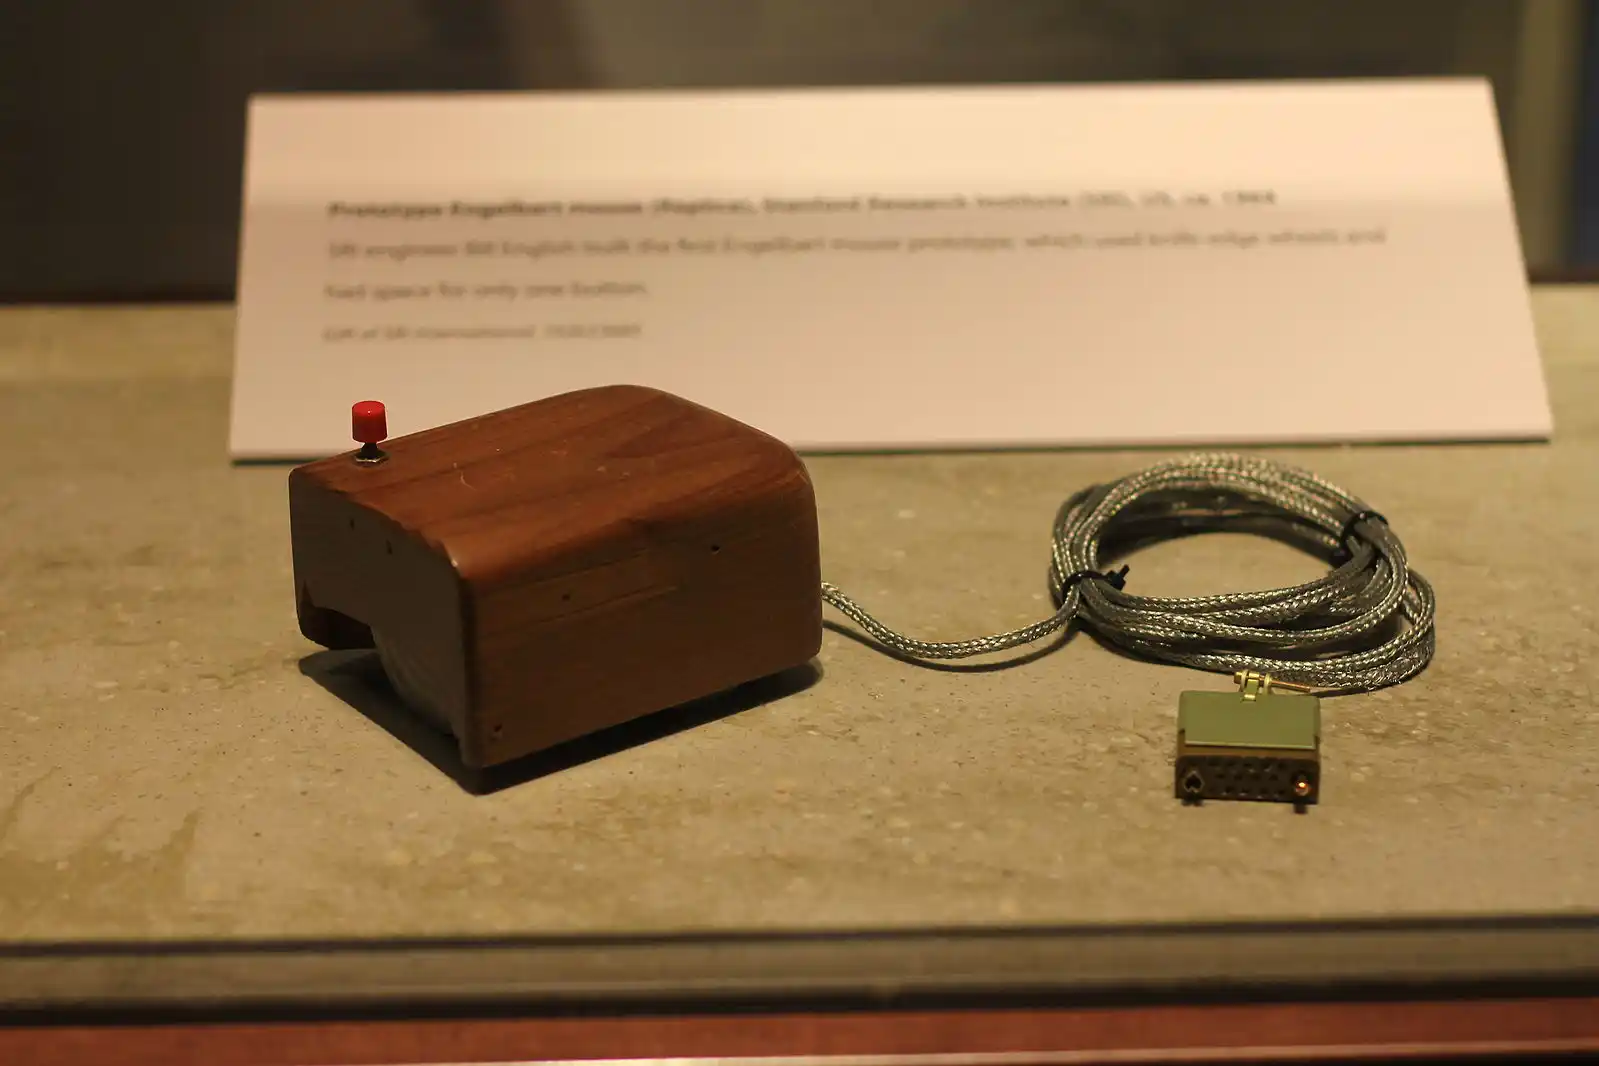 First Prototype Mouse (1964-1965)